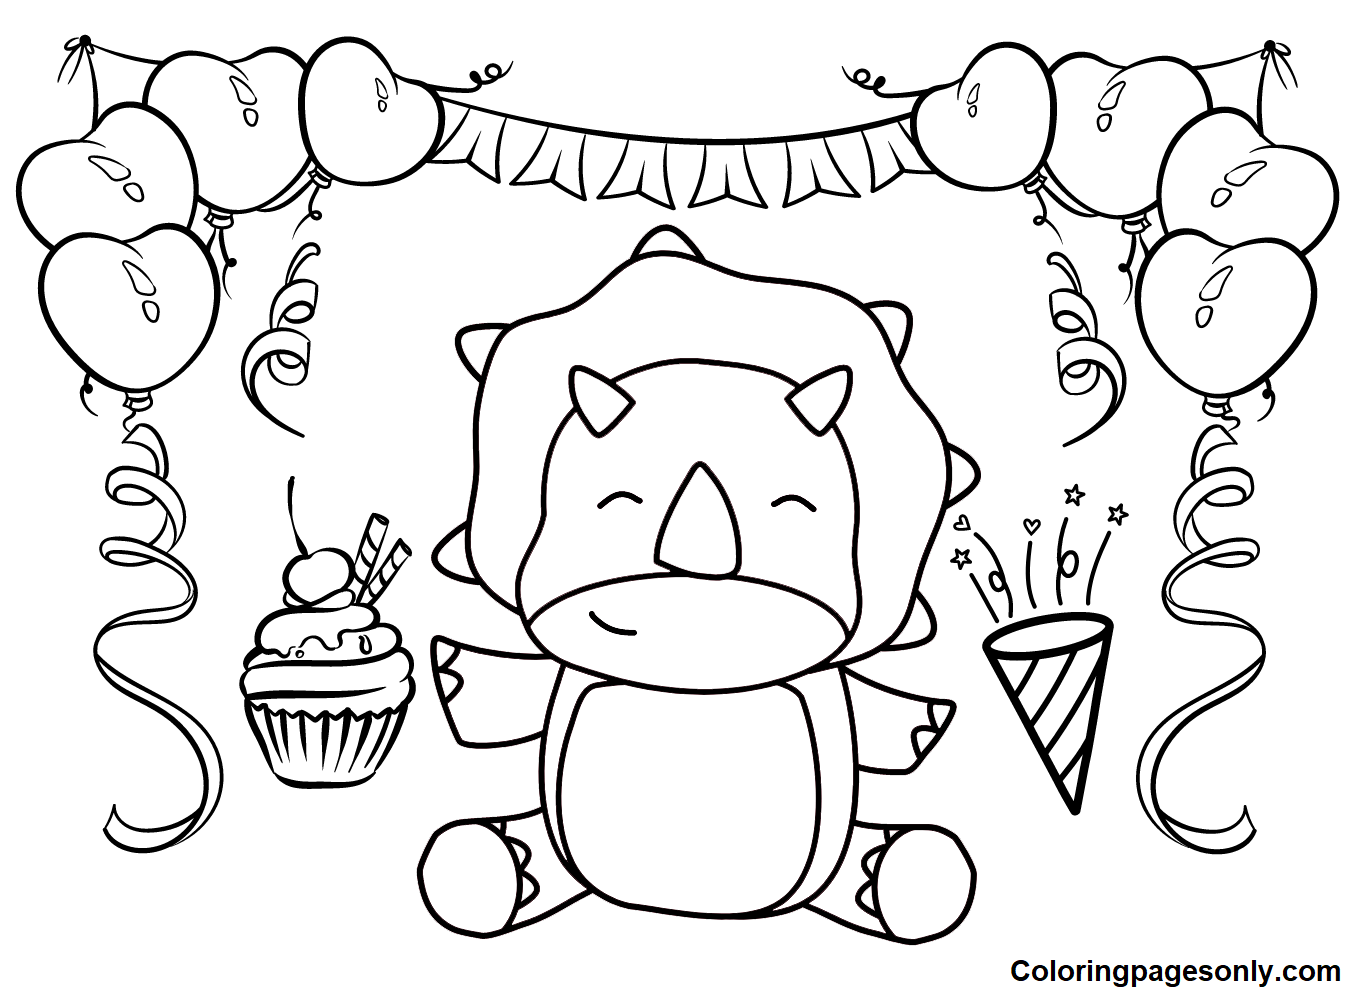 Triceratops Birthday Coloring Page